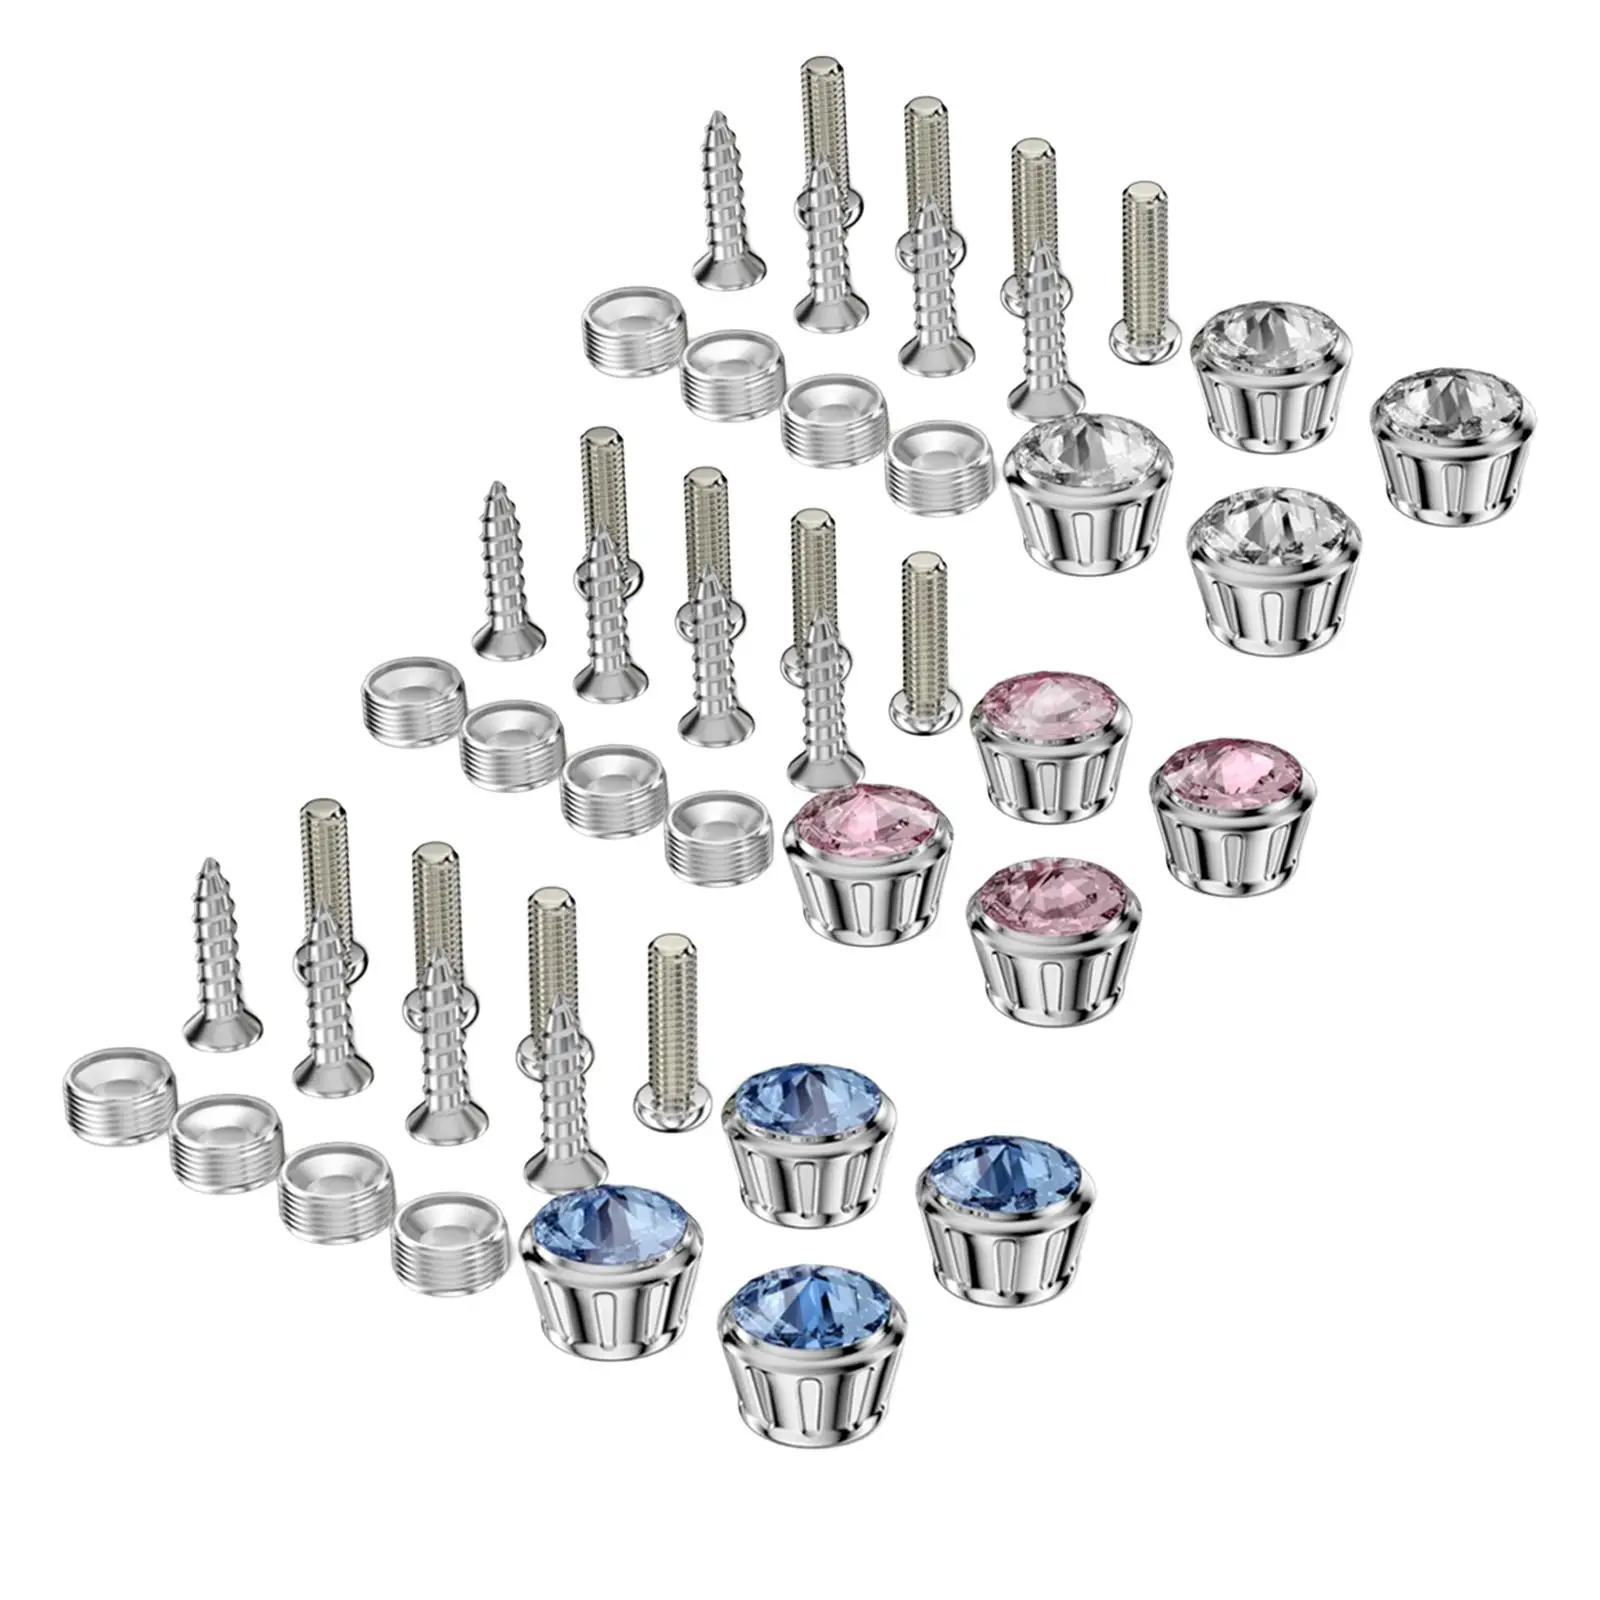 16x Car Anti Theft License Plate Screws Kit Hardware Fits for Cars Tag Frame